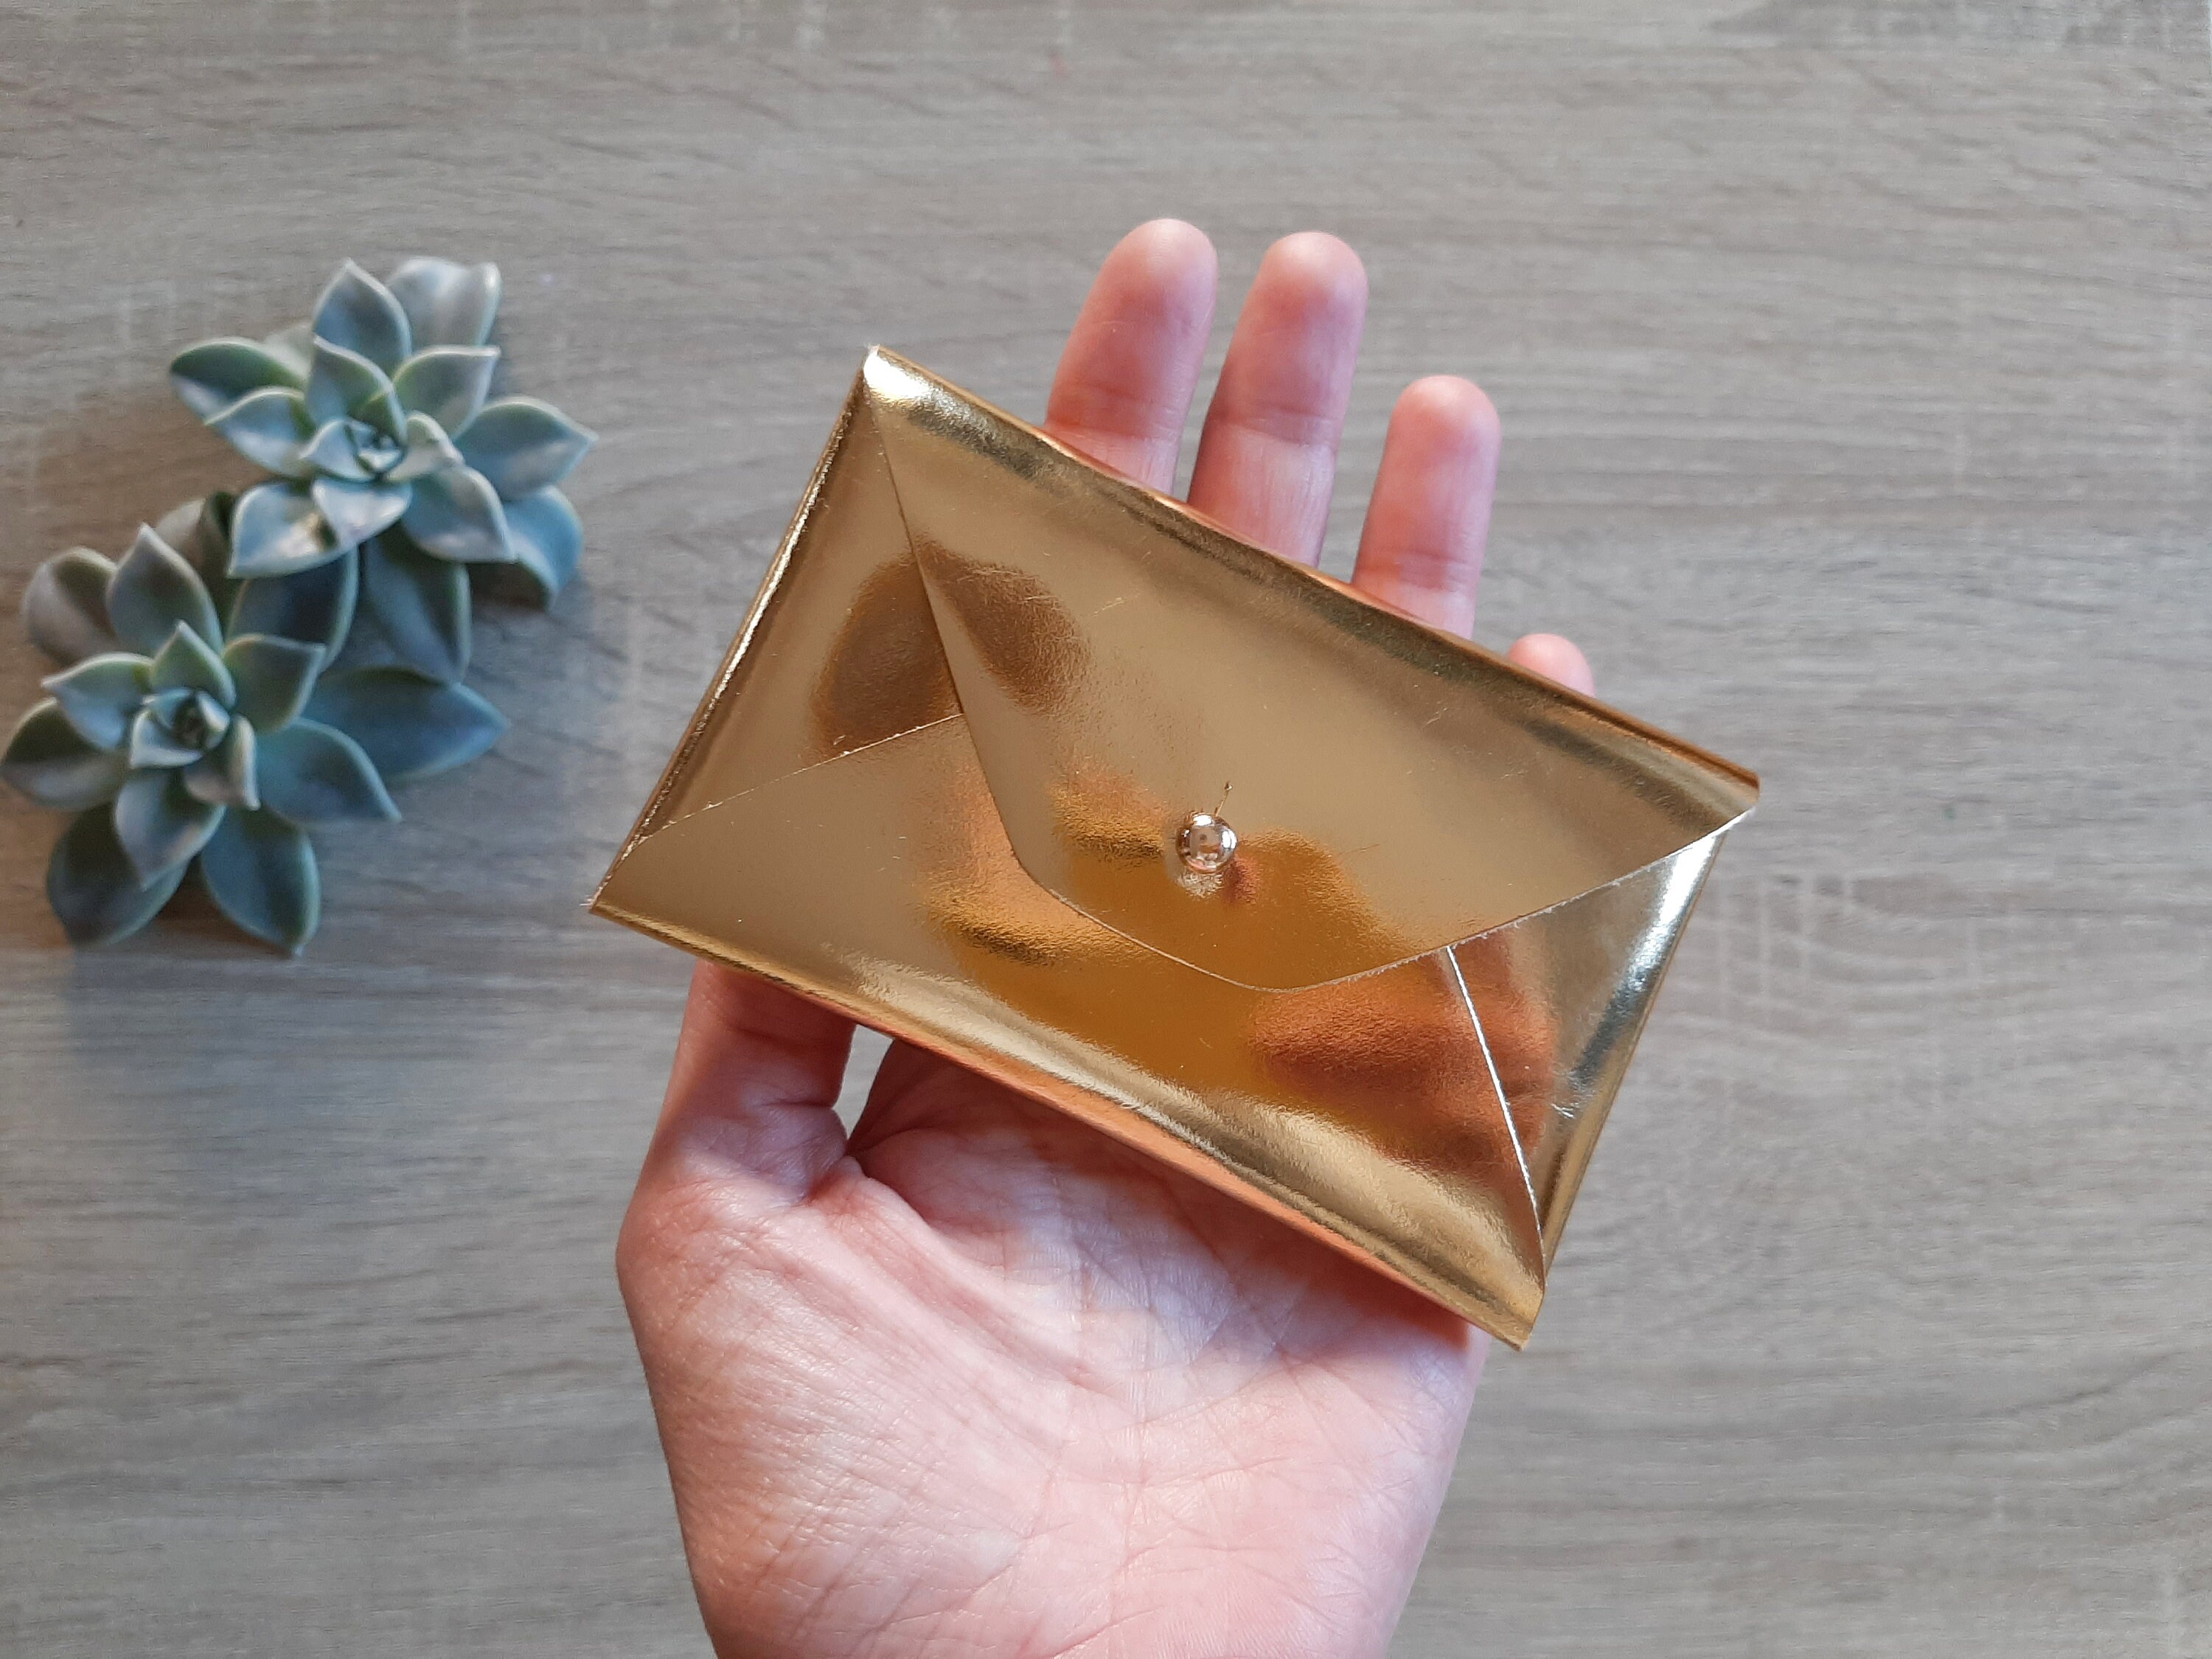 Gold Leather Card Case / Personalized Gold Envelope Card 